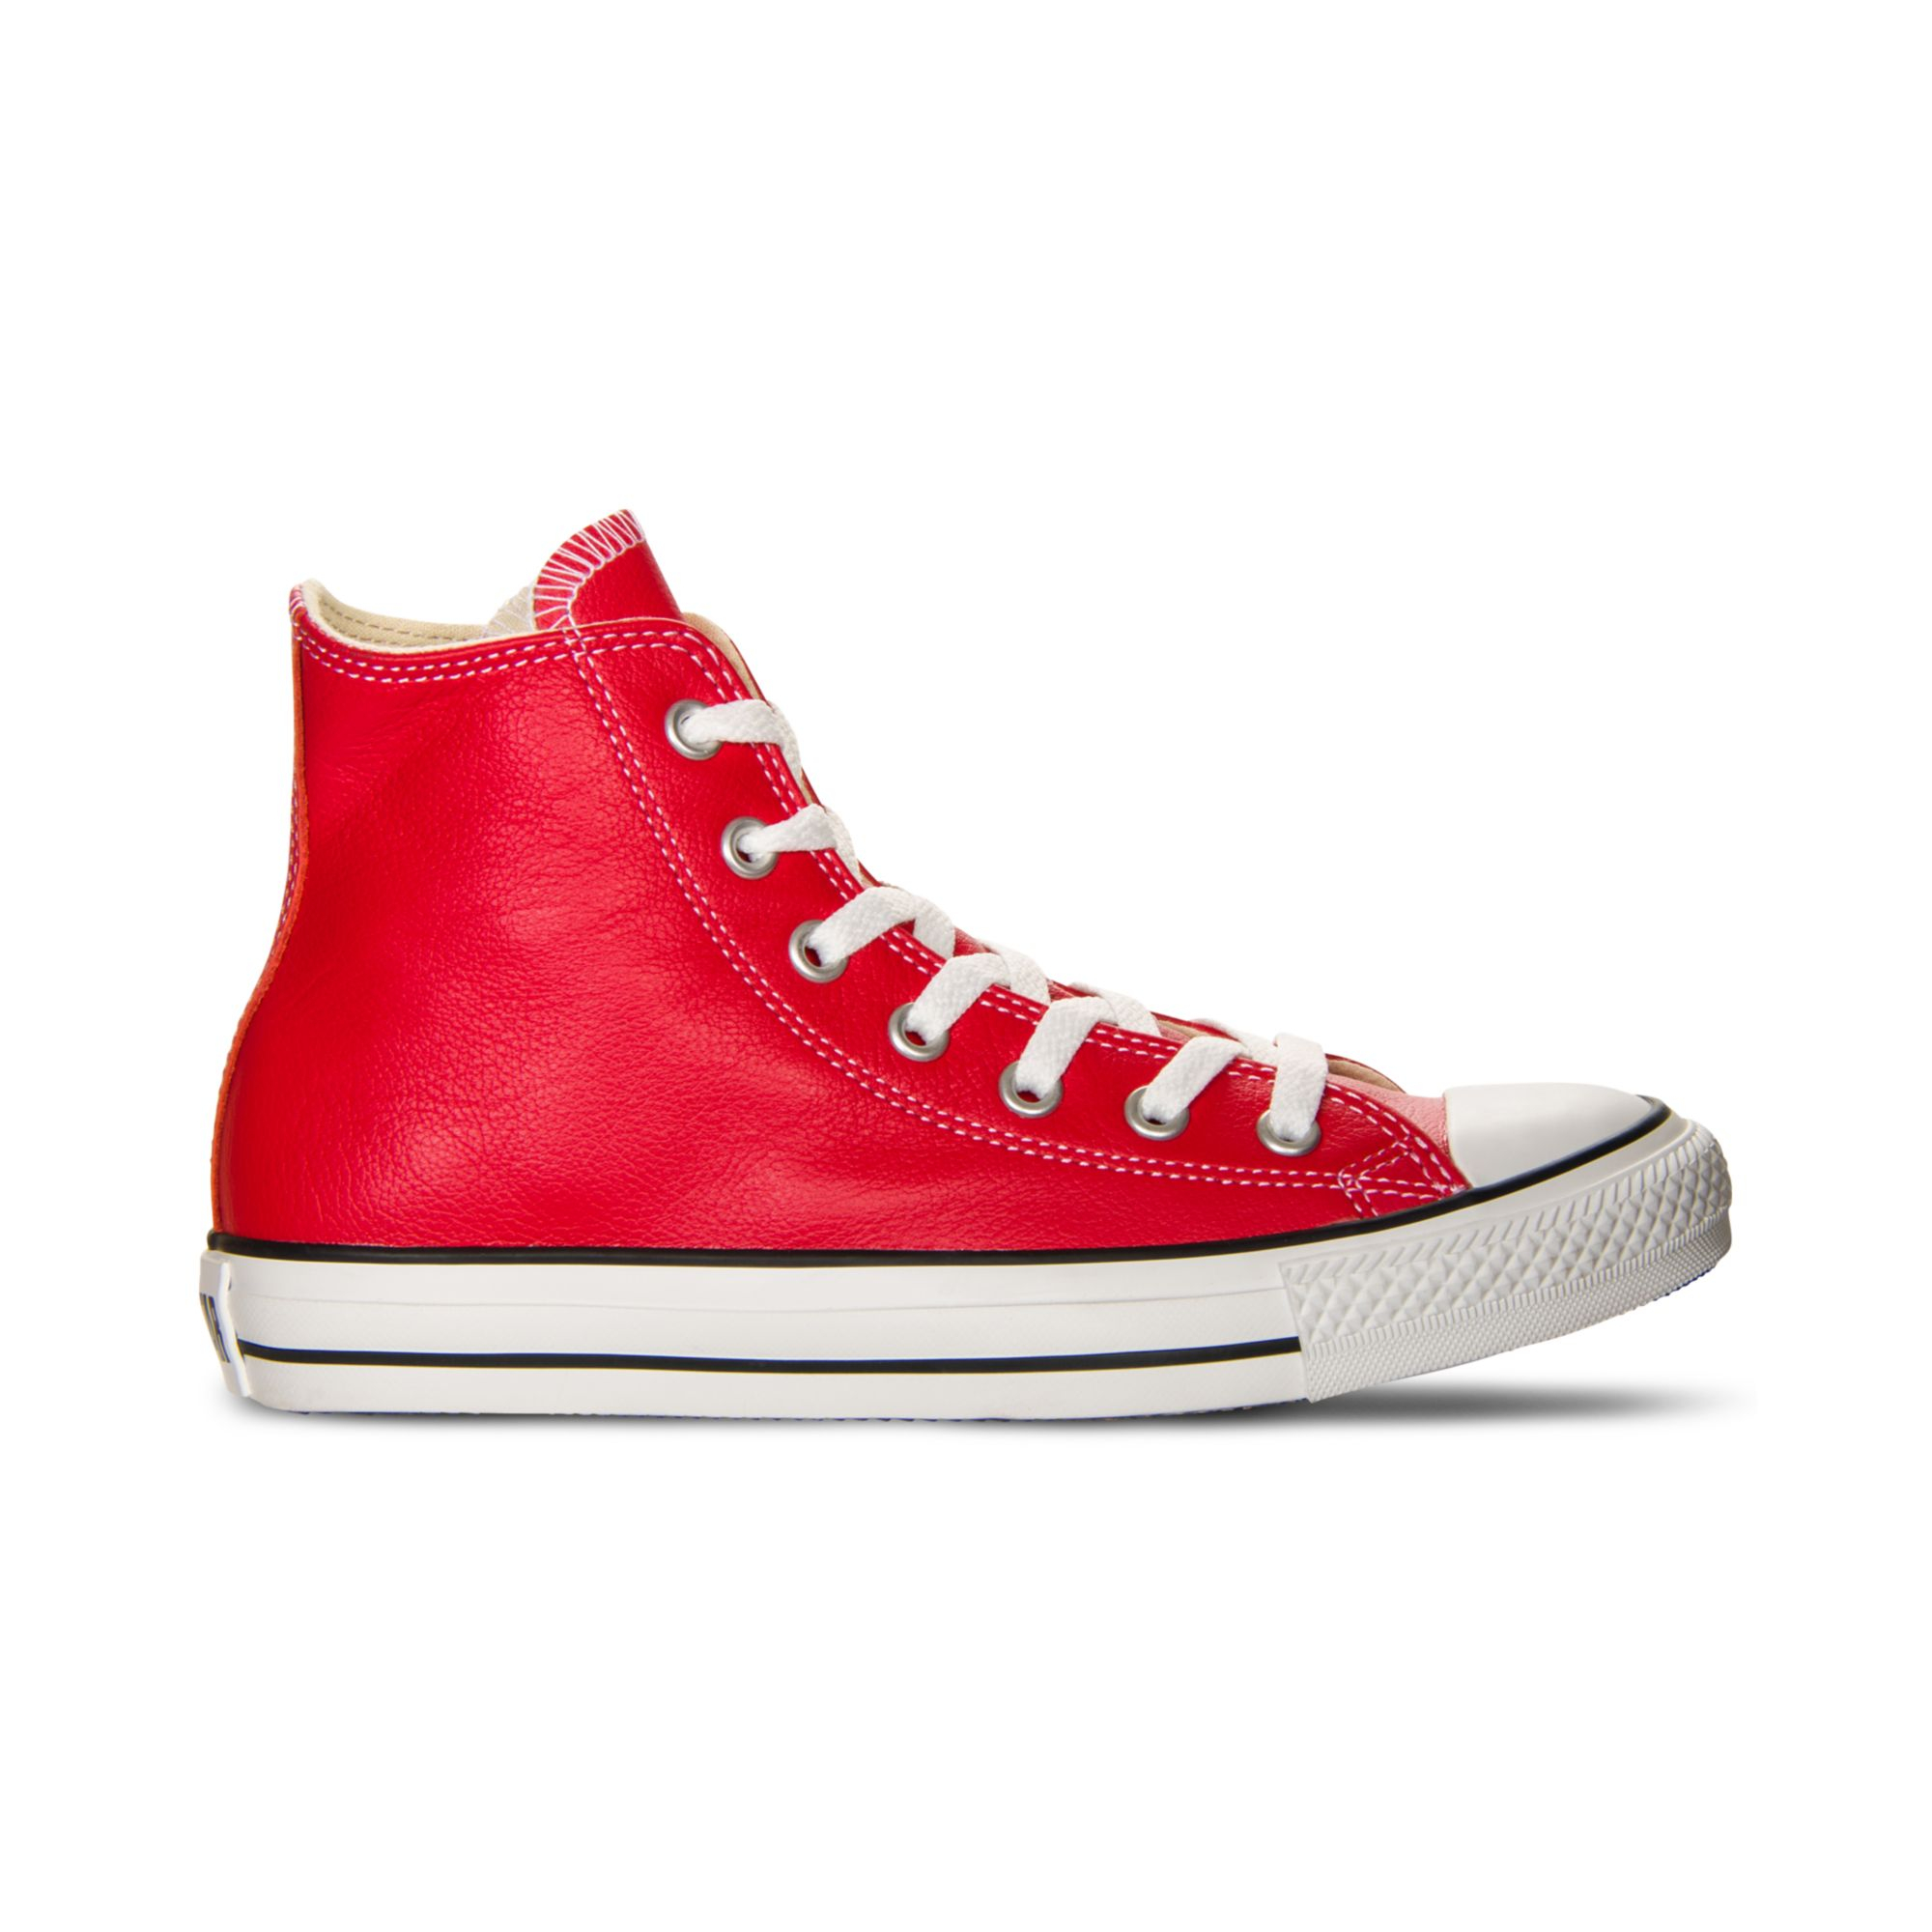 Converse Basic Leather Hi Casual Sneakers in Red for Men - Lyst